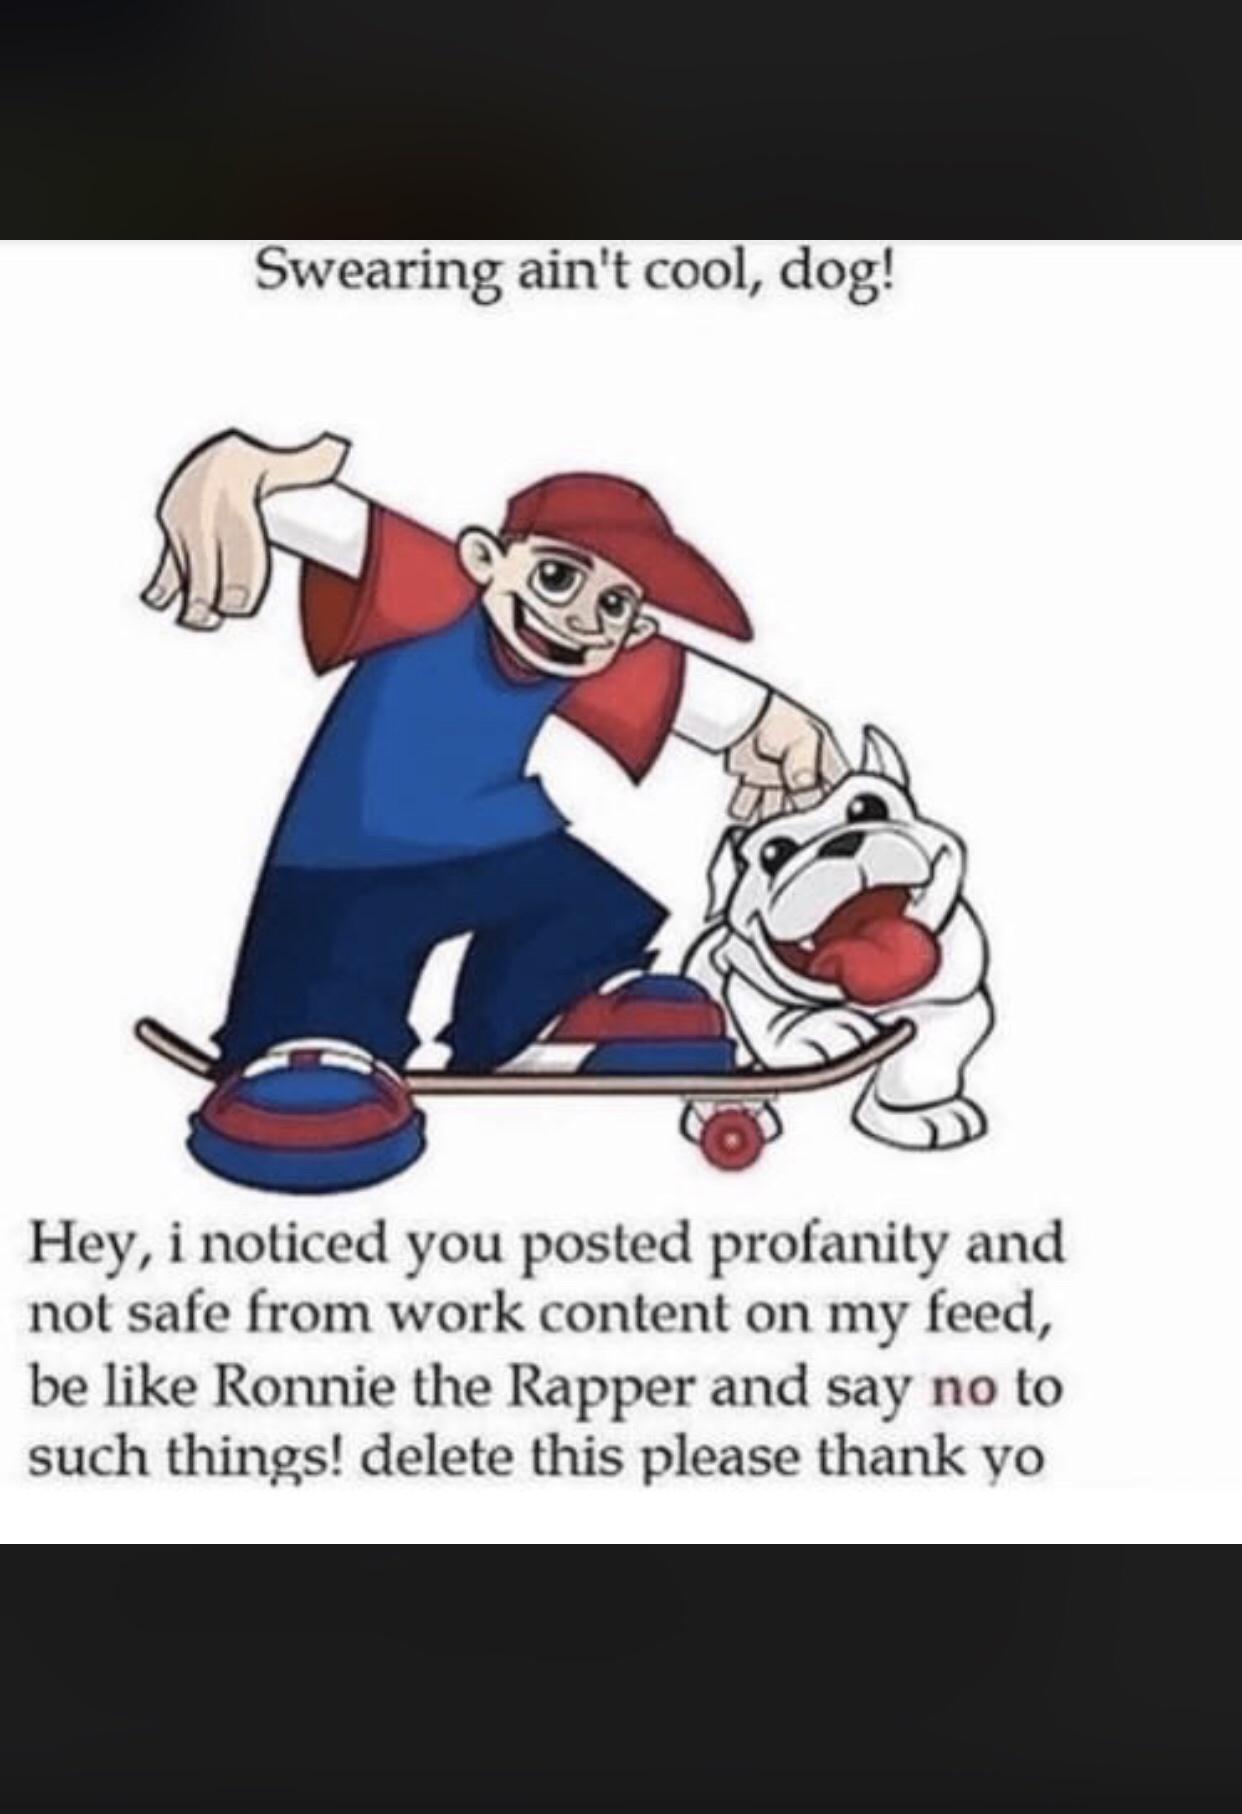 ronnie the rapper meme - Swearing ain't cool, dog! Hey, i noticed you posted profanity and not safe from work content on my feed, be Ronnie the Rapper and say no to such things! delete this please thank yo